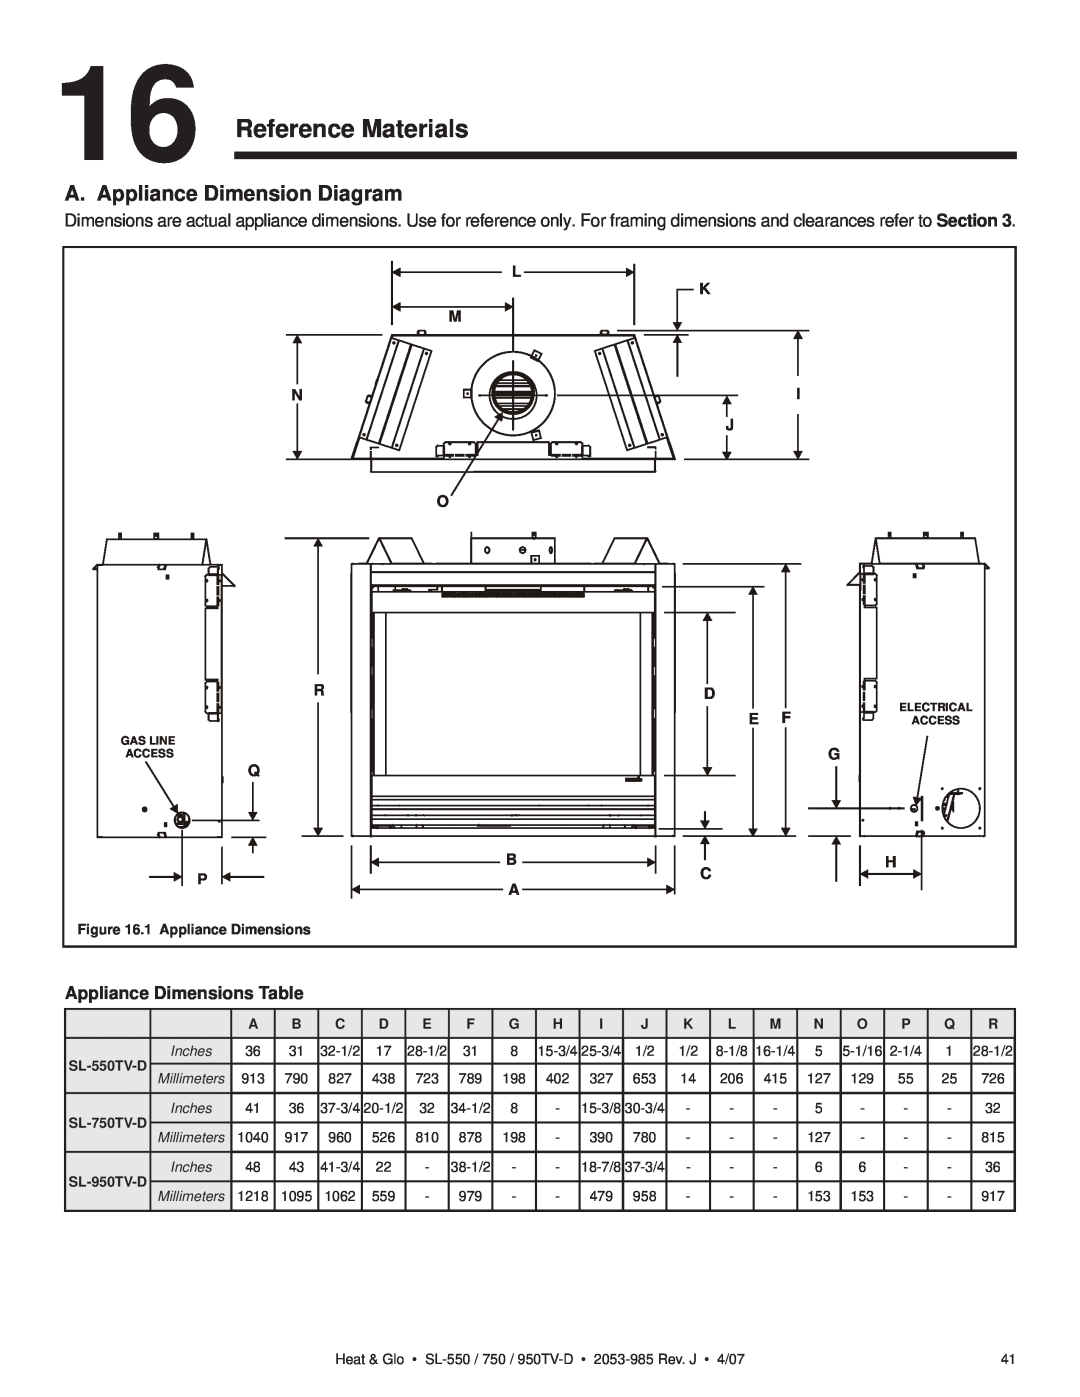 Heat & Glo LifeStyle SL-750TV-D Reference Materials, A. Appliance Dimension Diagram, Appliance Dimensions Table 